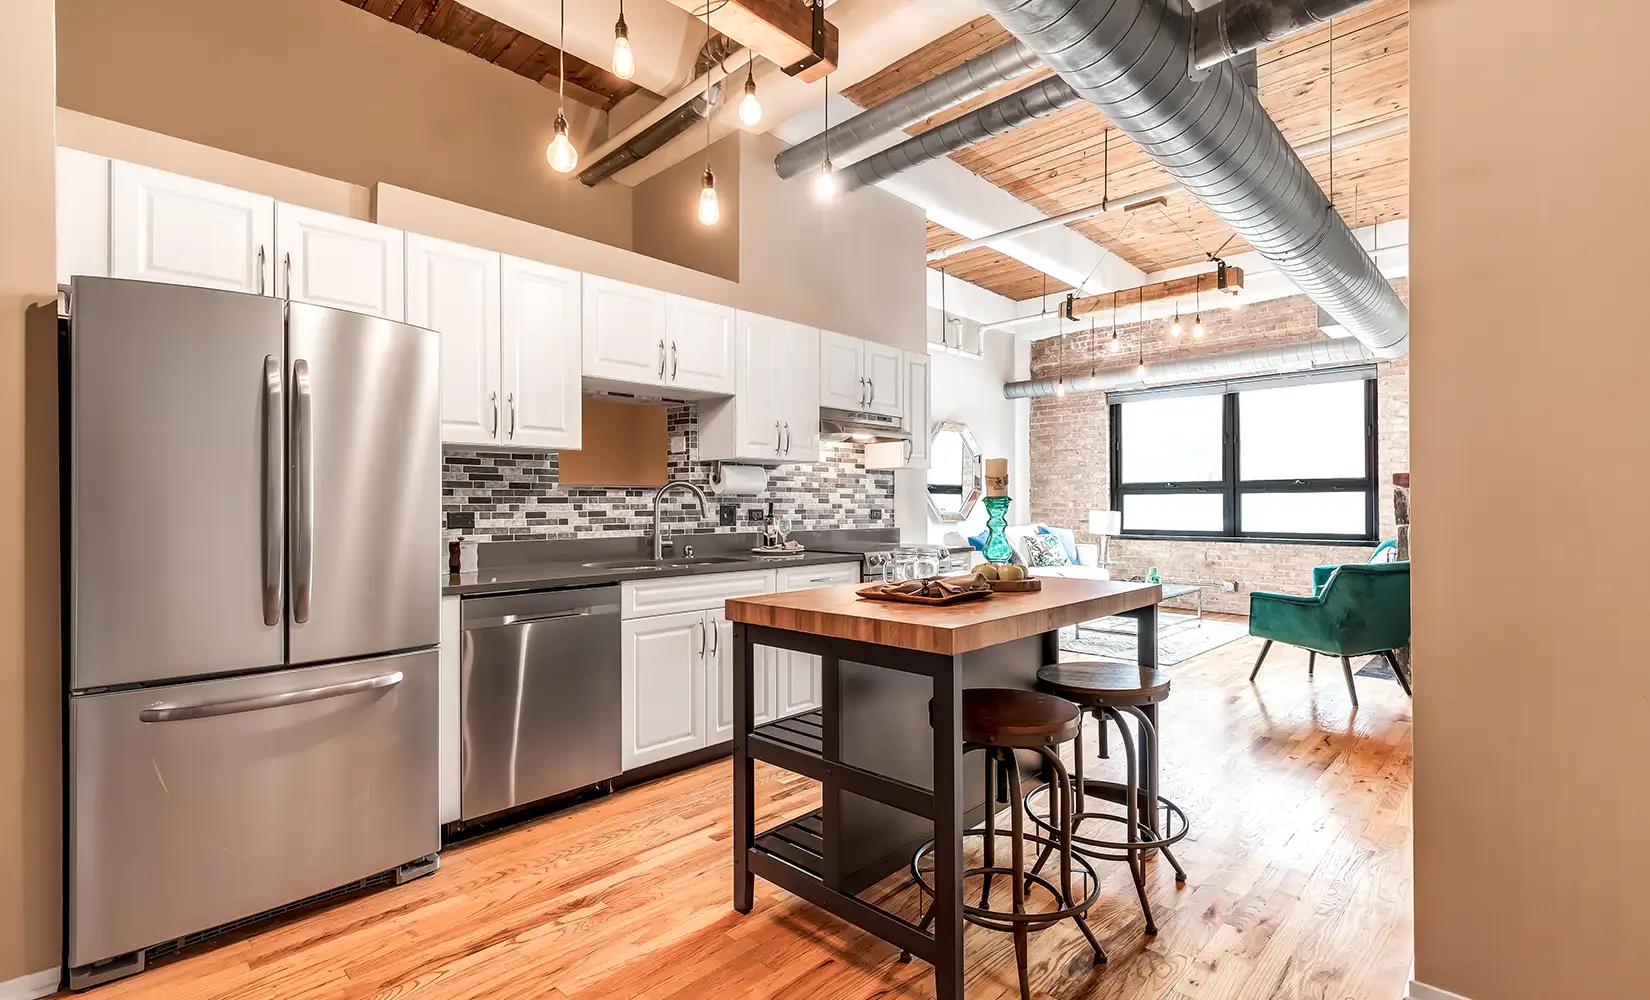 Industrial kitchen with metal ceiling beams, kitchen island, wood floors, stainless steel appliances, and hanging lights.